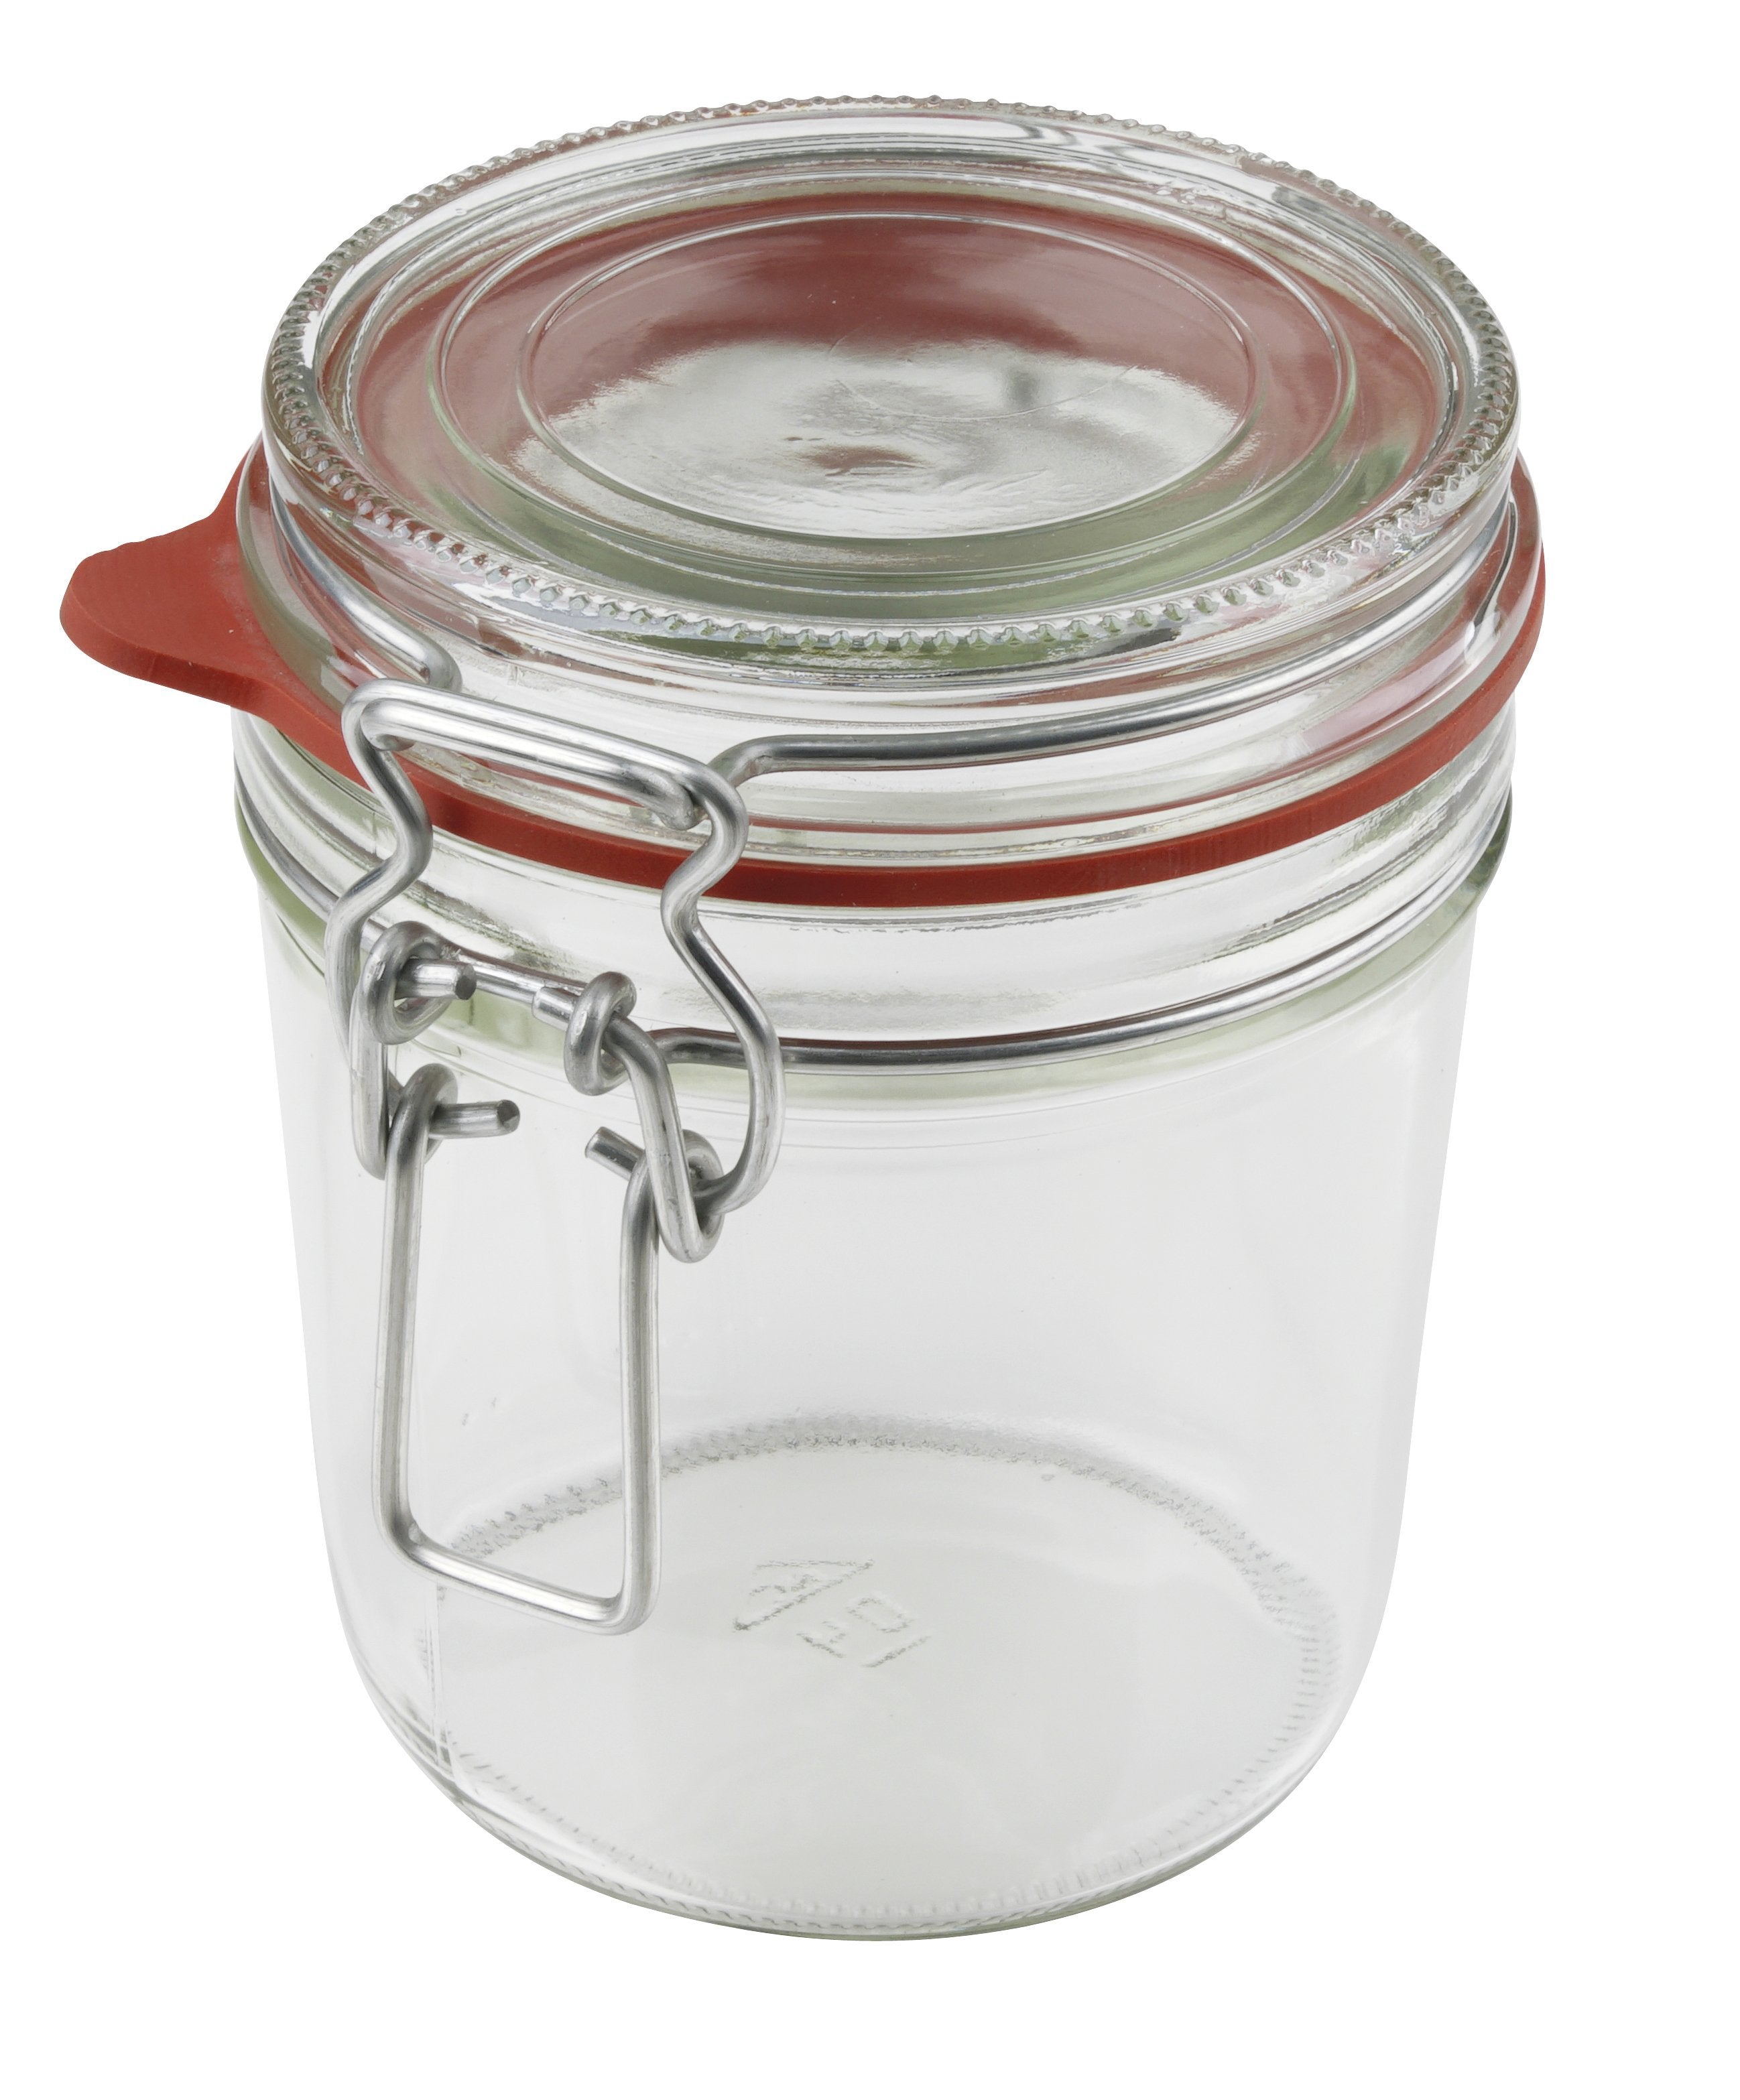 Dr. Oetker Swing Top Jar 530 Ml - Whole and All